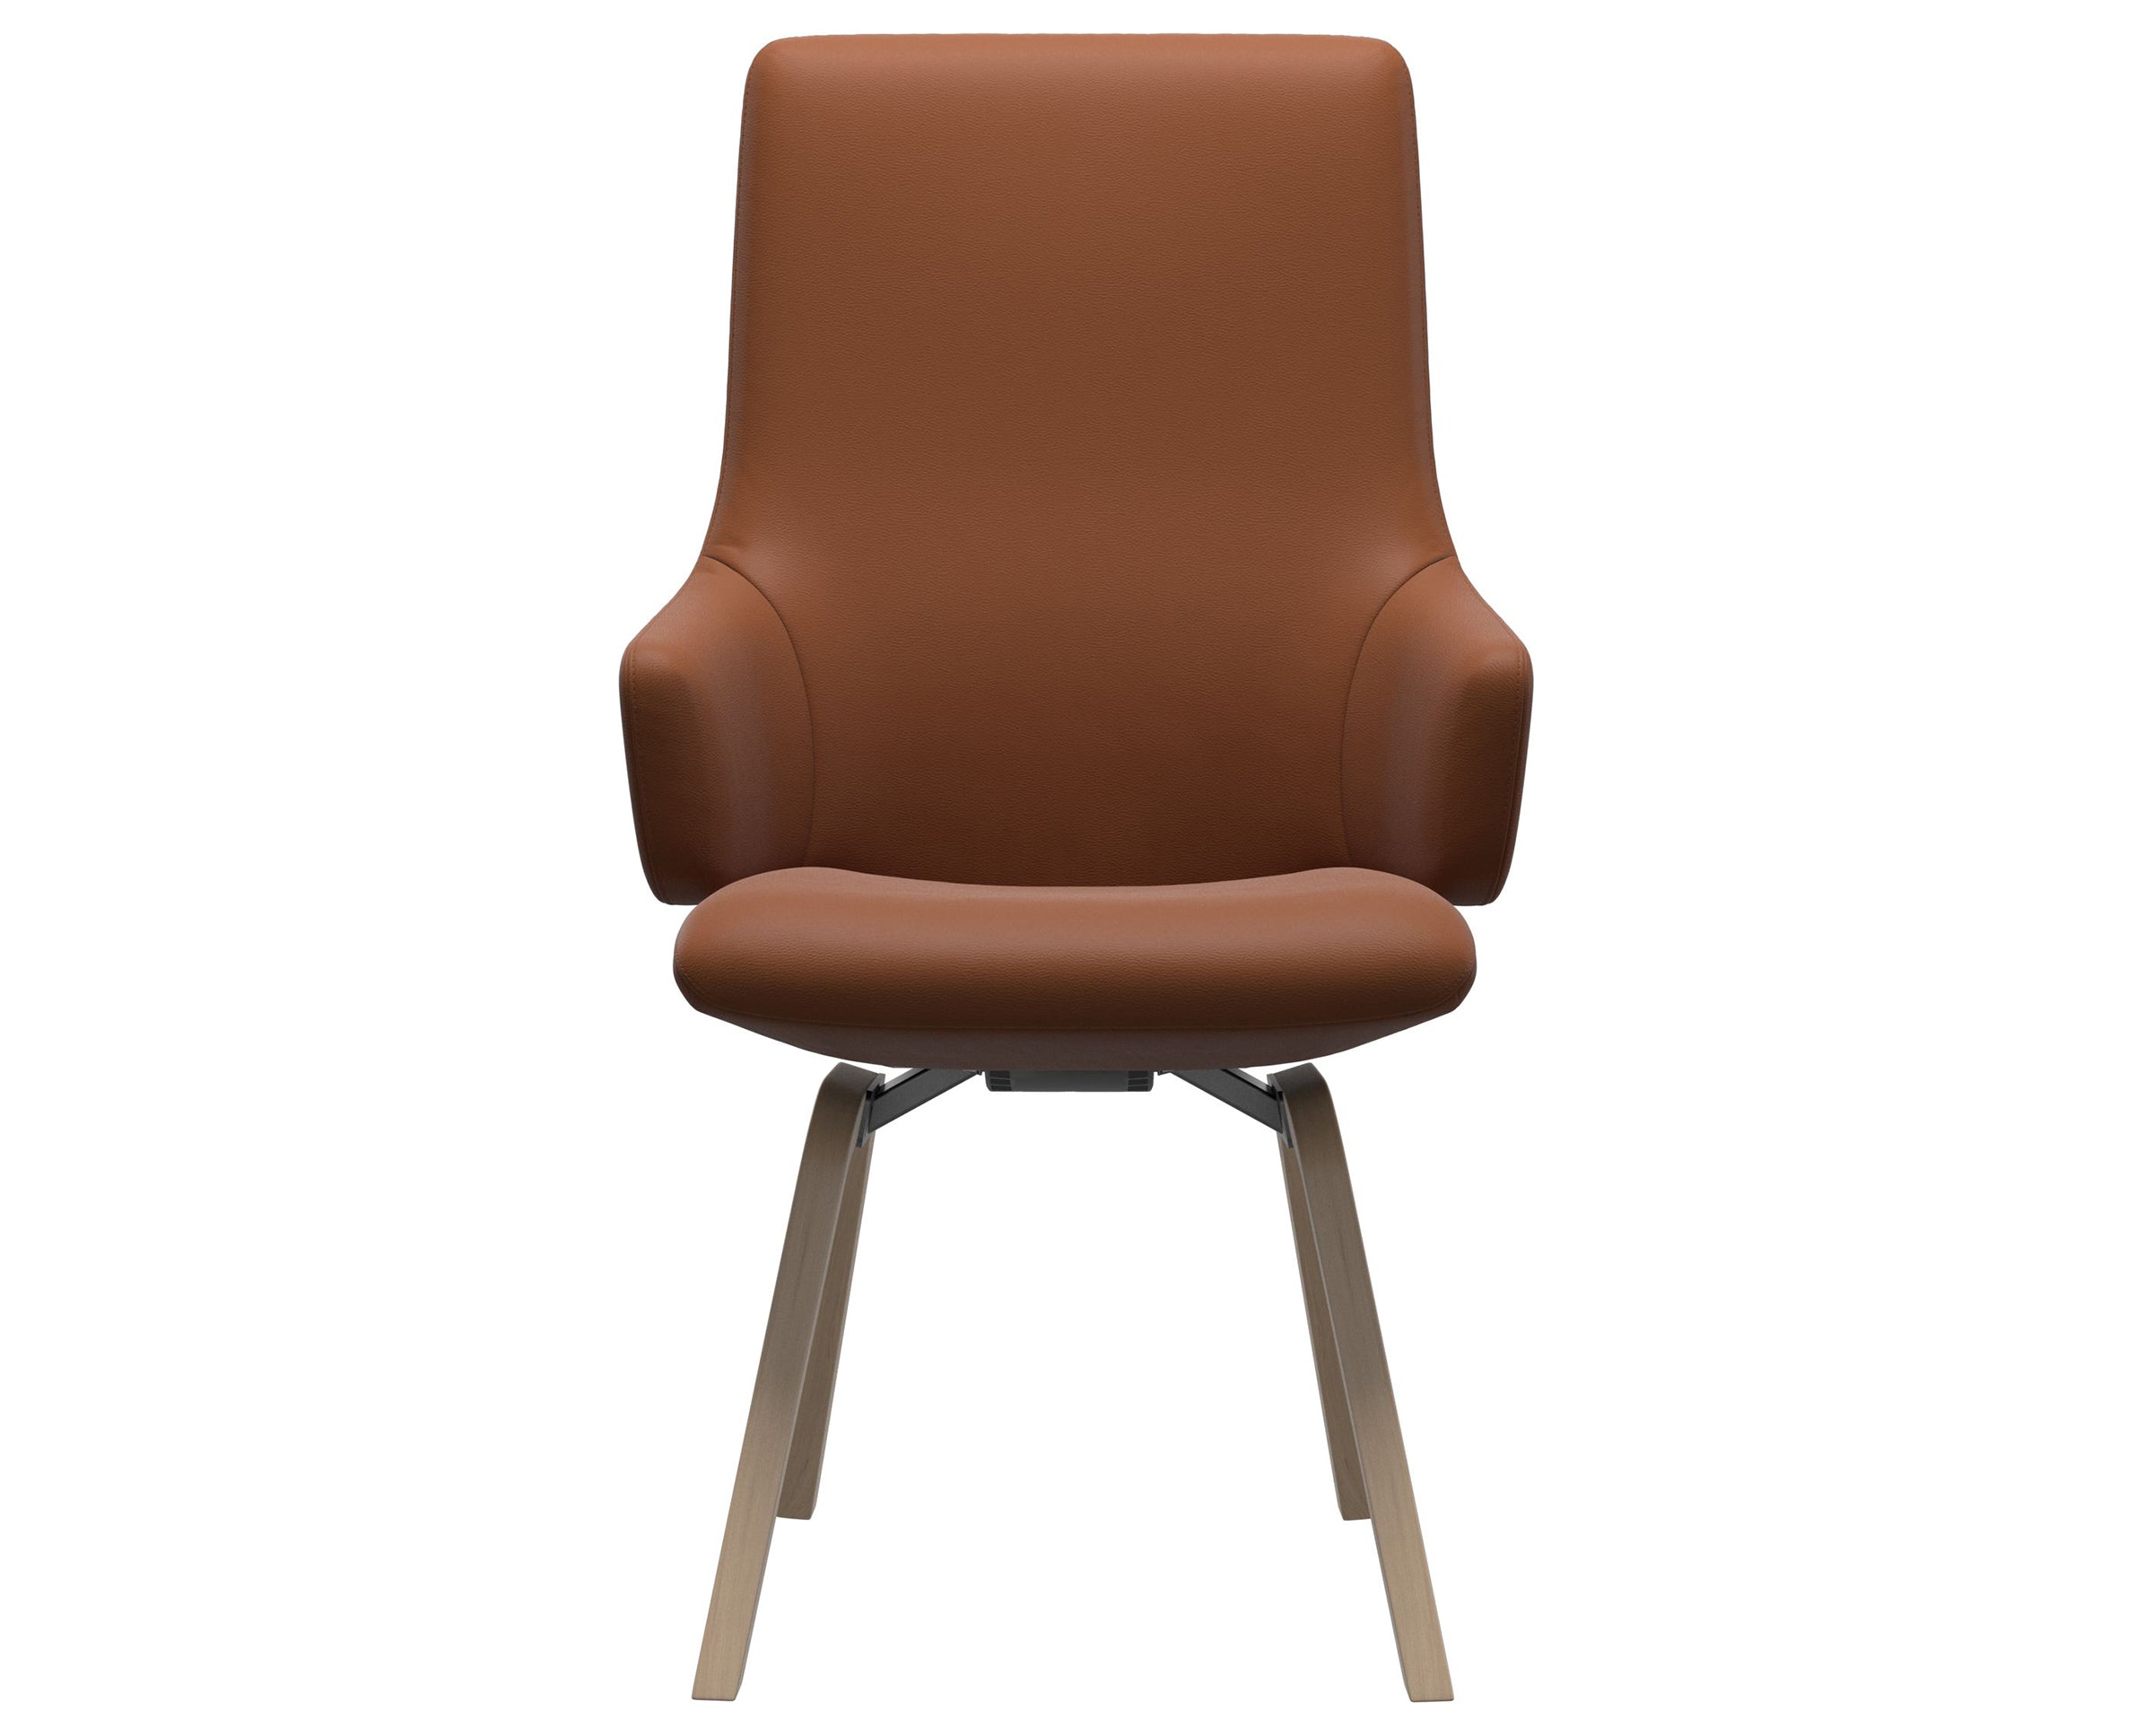 Paloma Leather New Cognac and Natural Base | Stressless Laurel High Back D200 Dining Chair w/Arms | Valley Ridge Furniture